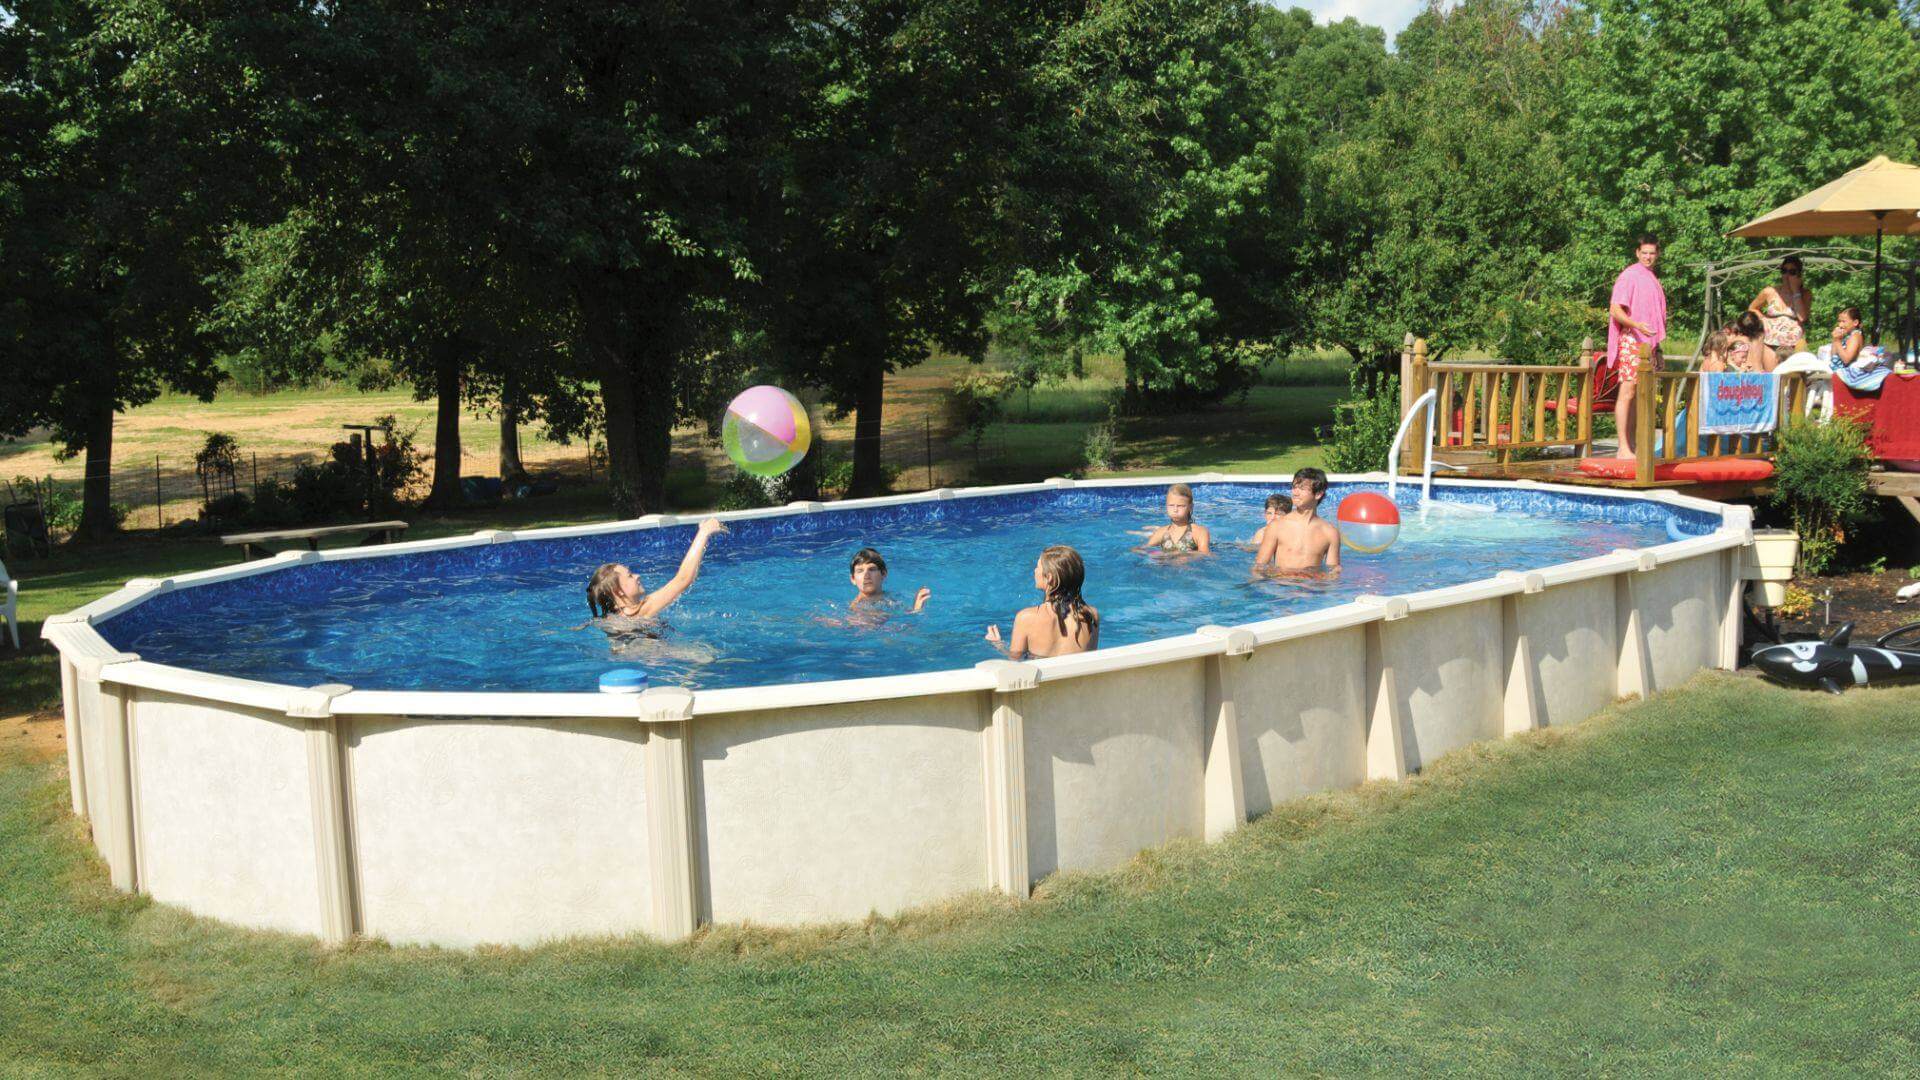 Doughboy Pool in backyard with kids playing inside and adults grilling on deck